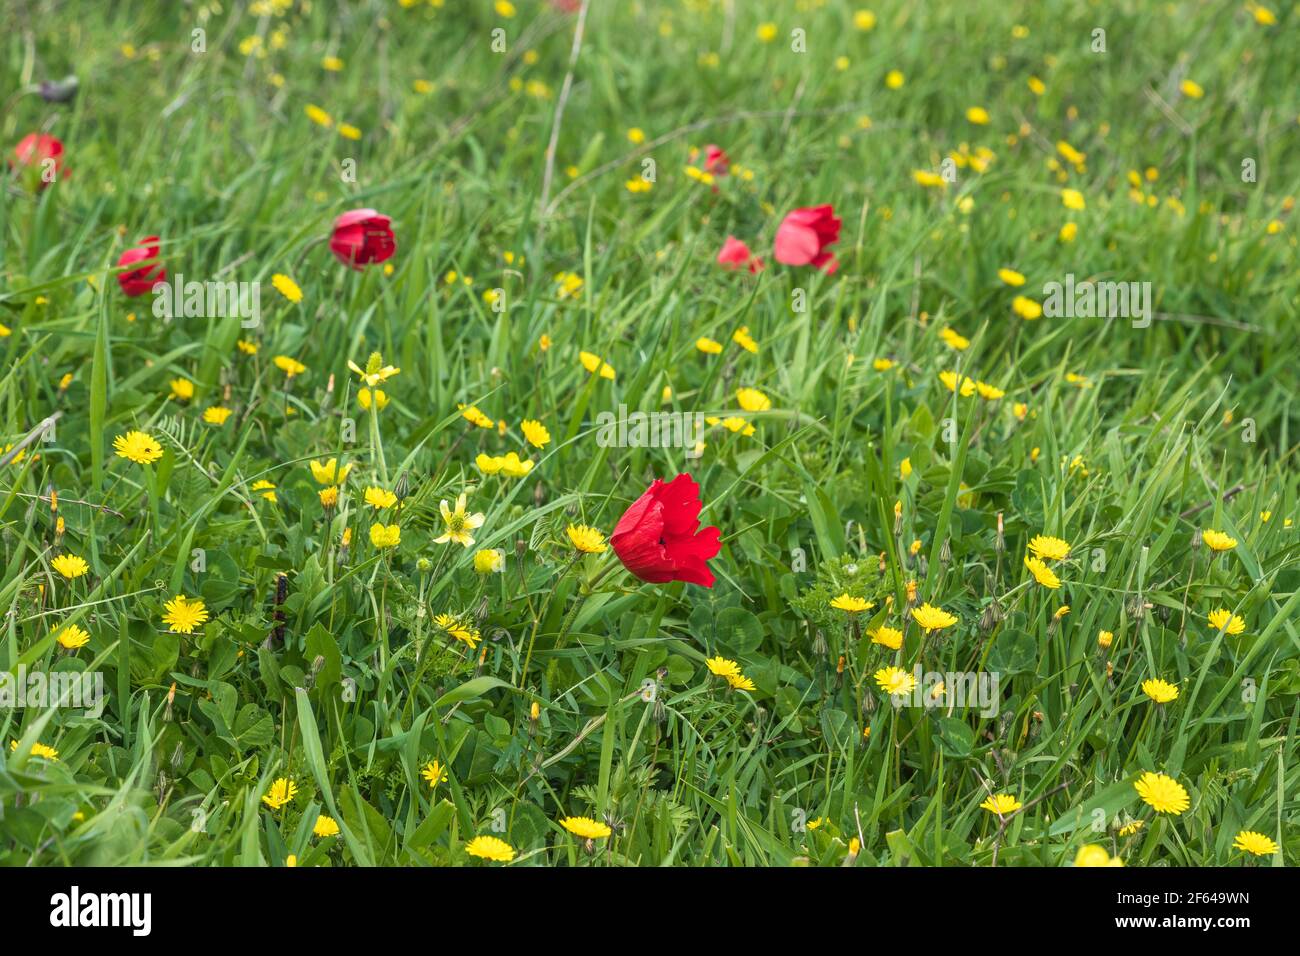 Field of blooming red anemones among green grass. Israel Stock Photo